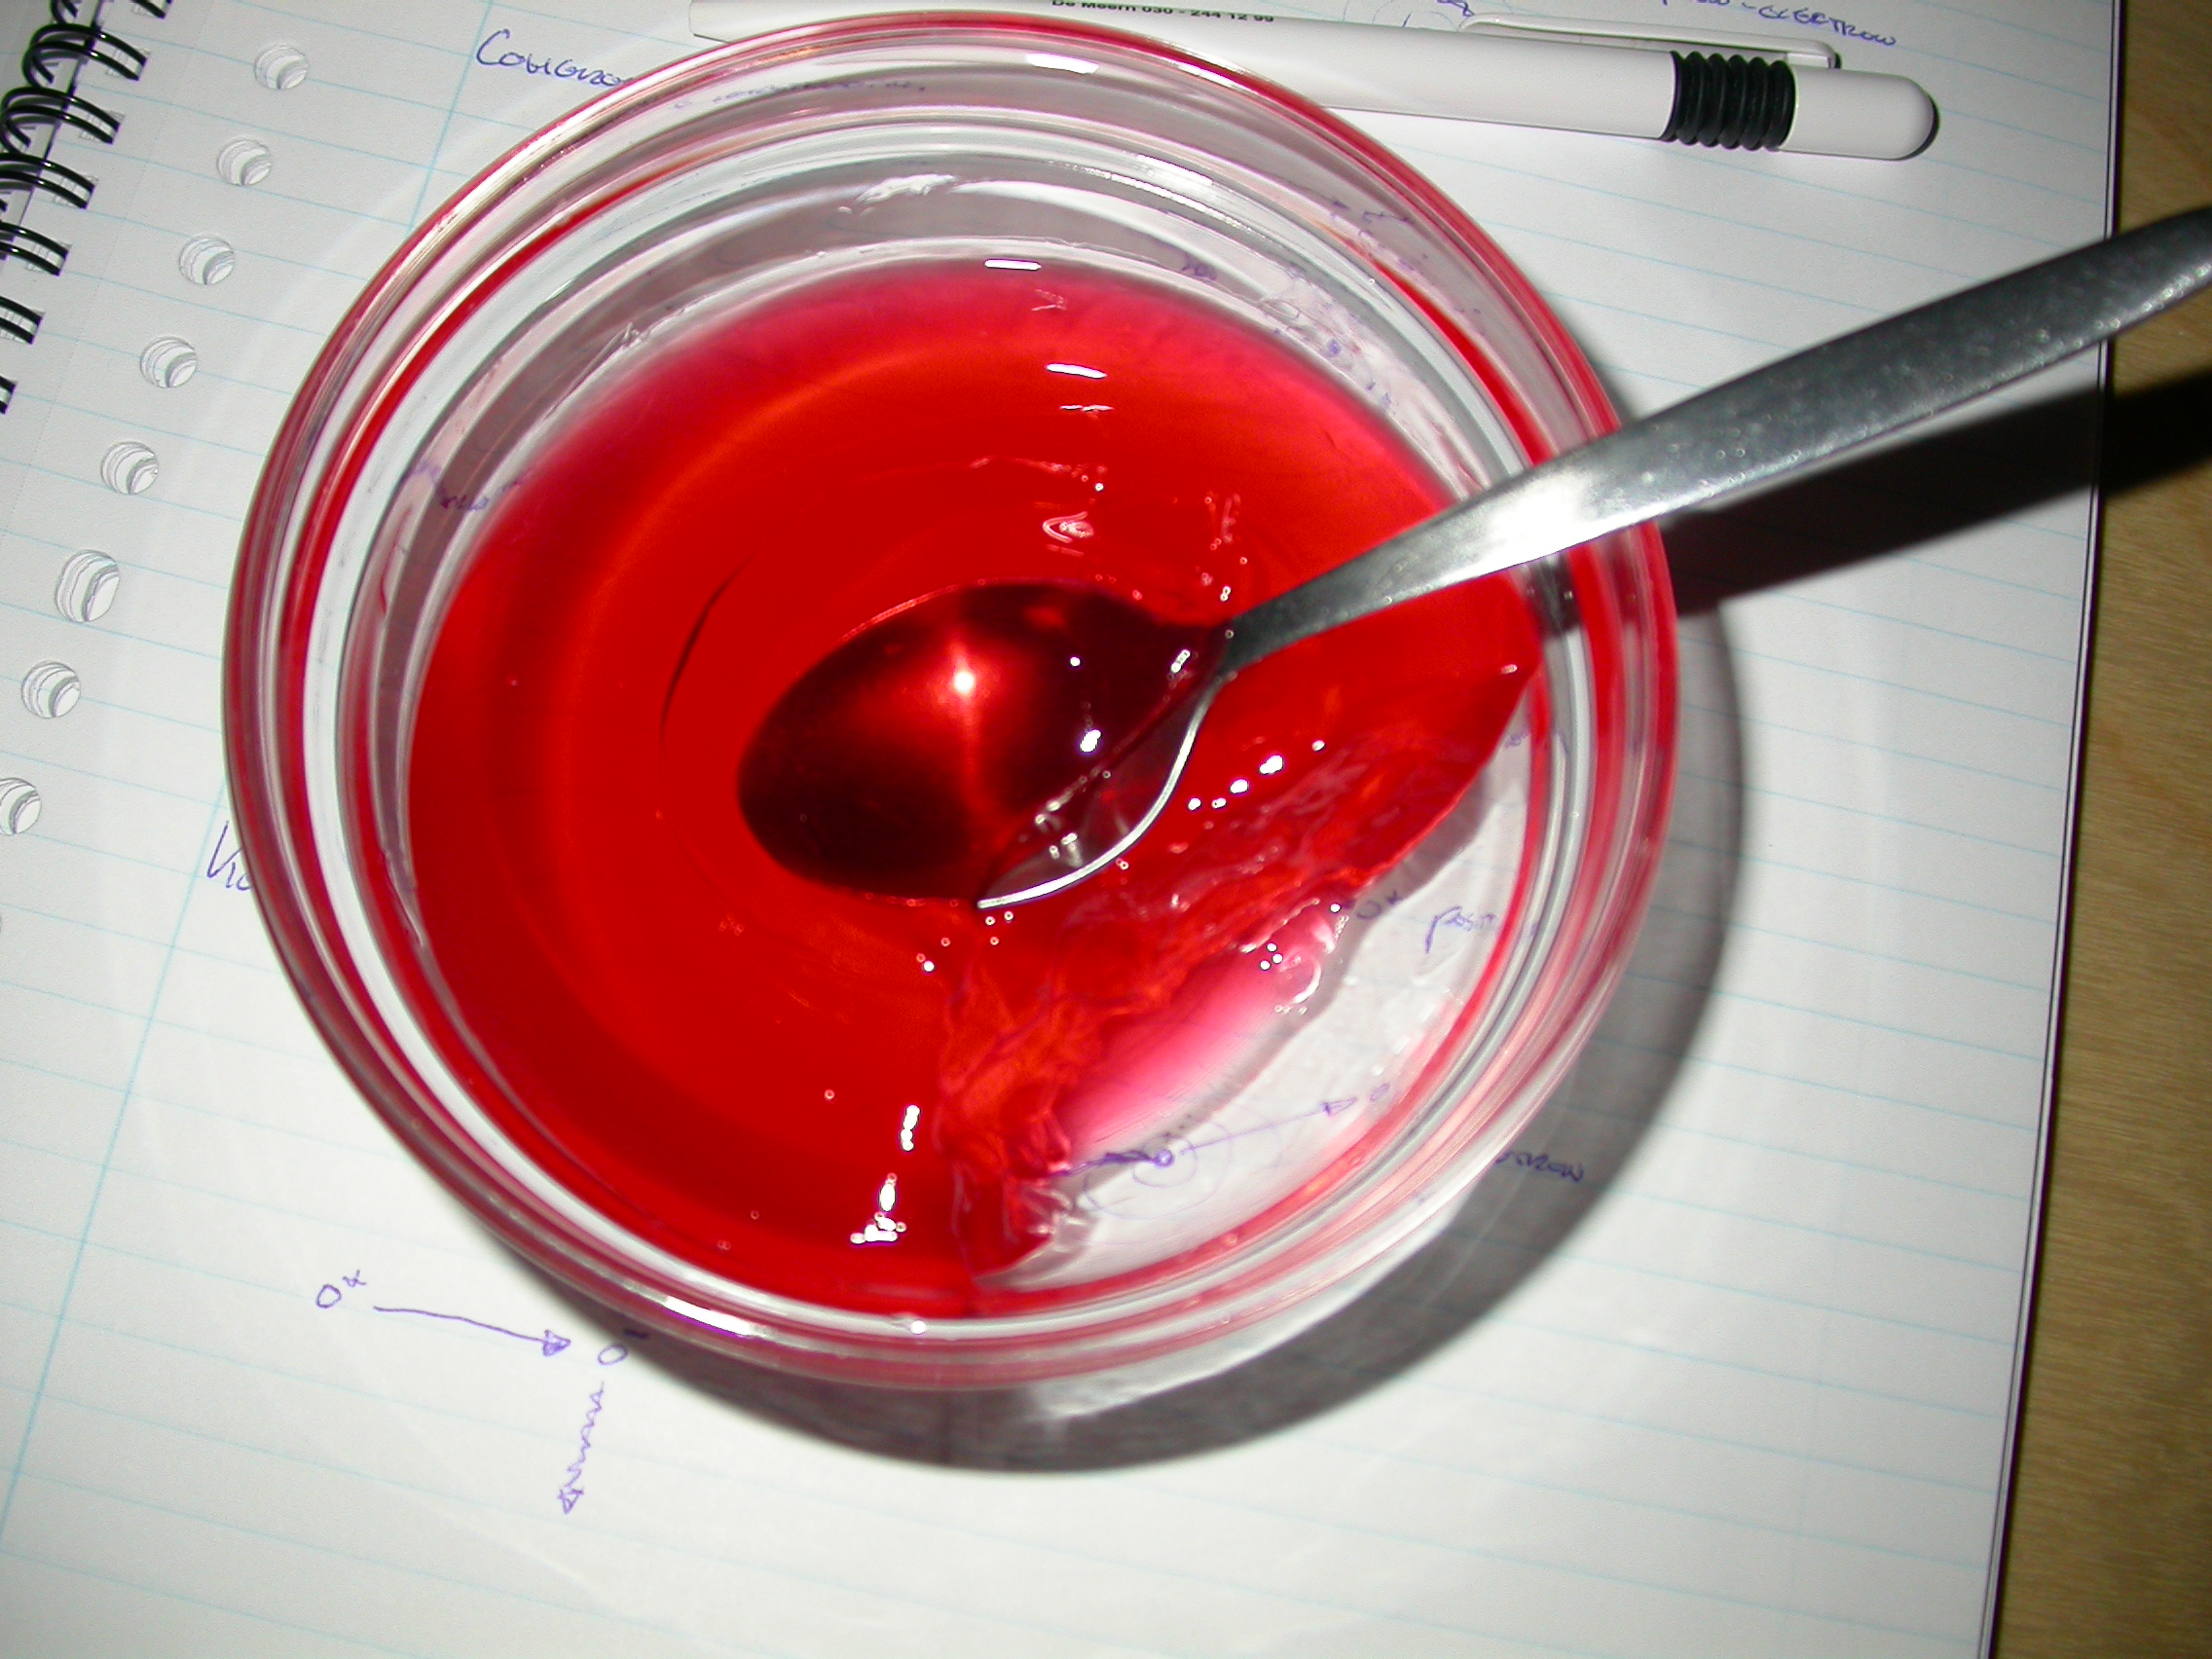 paul pudding red in glass while studying jelly spoon textures